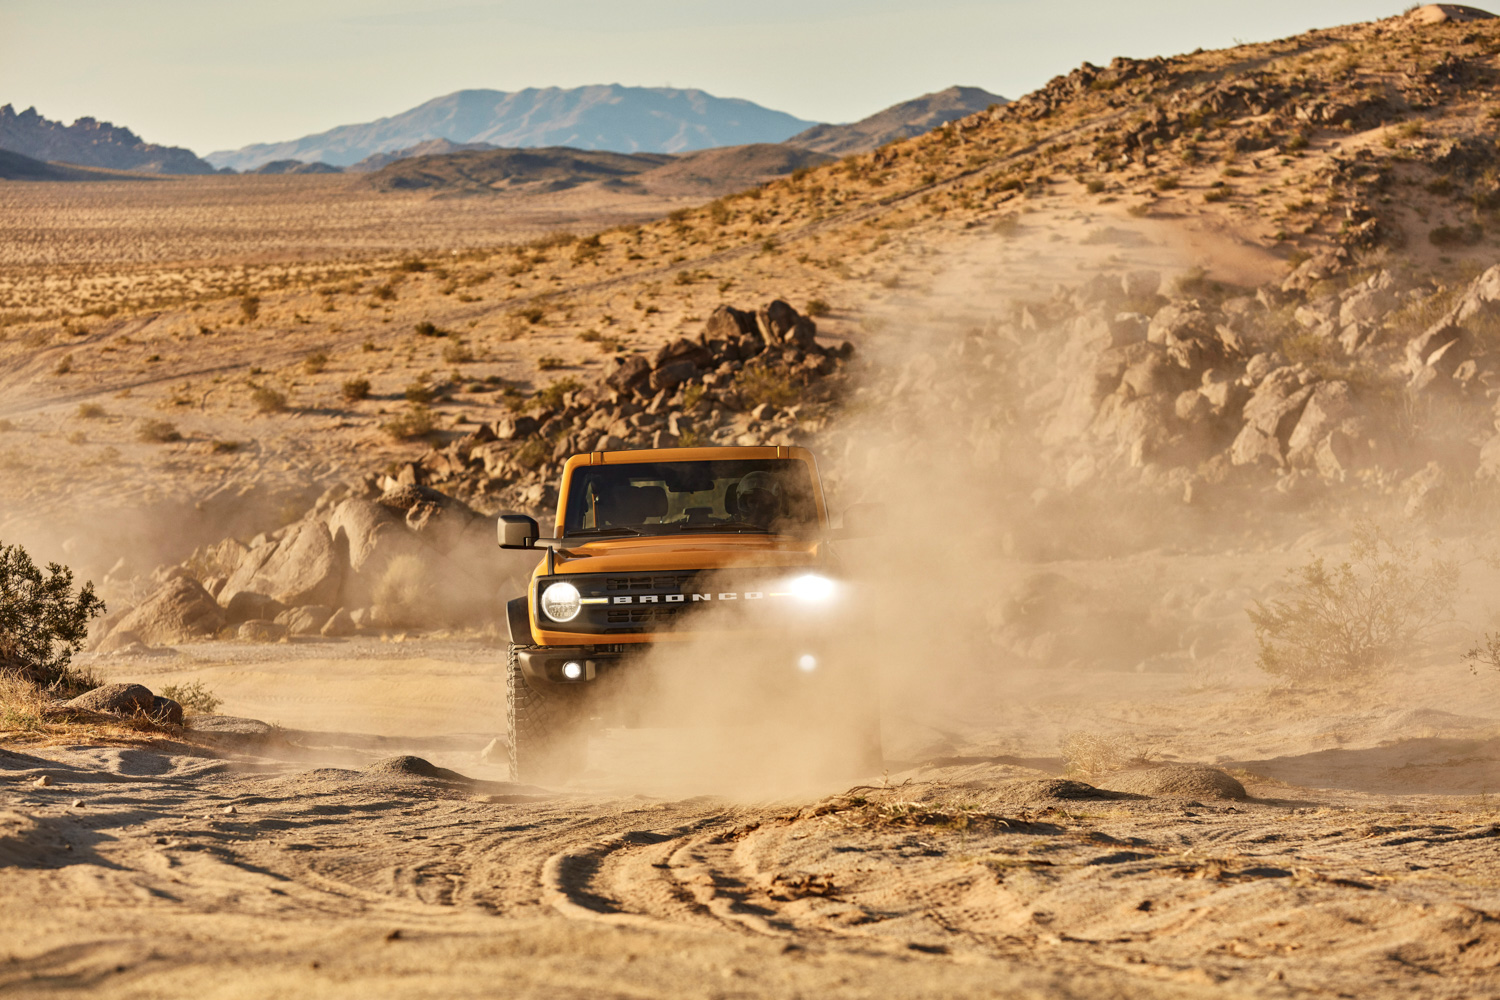 Ford shows off new Bronco 4x4 range